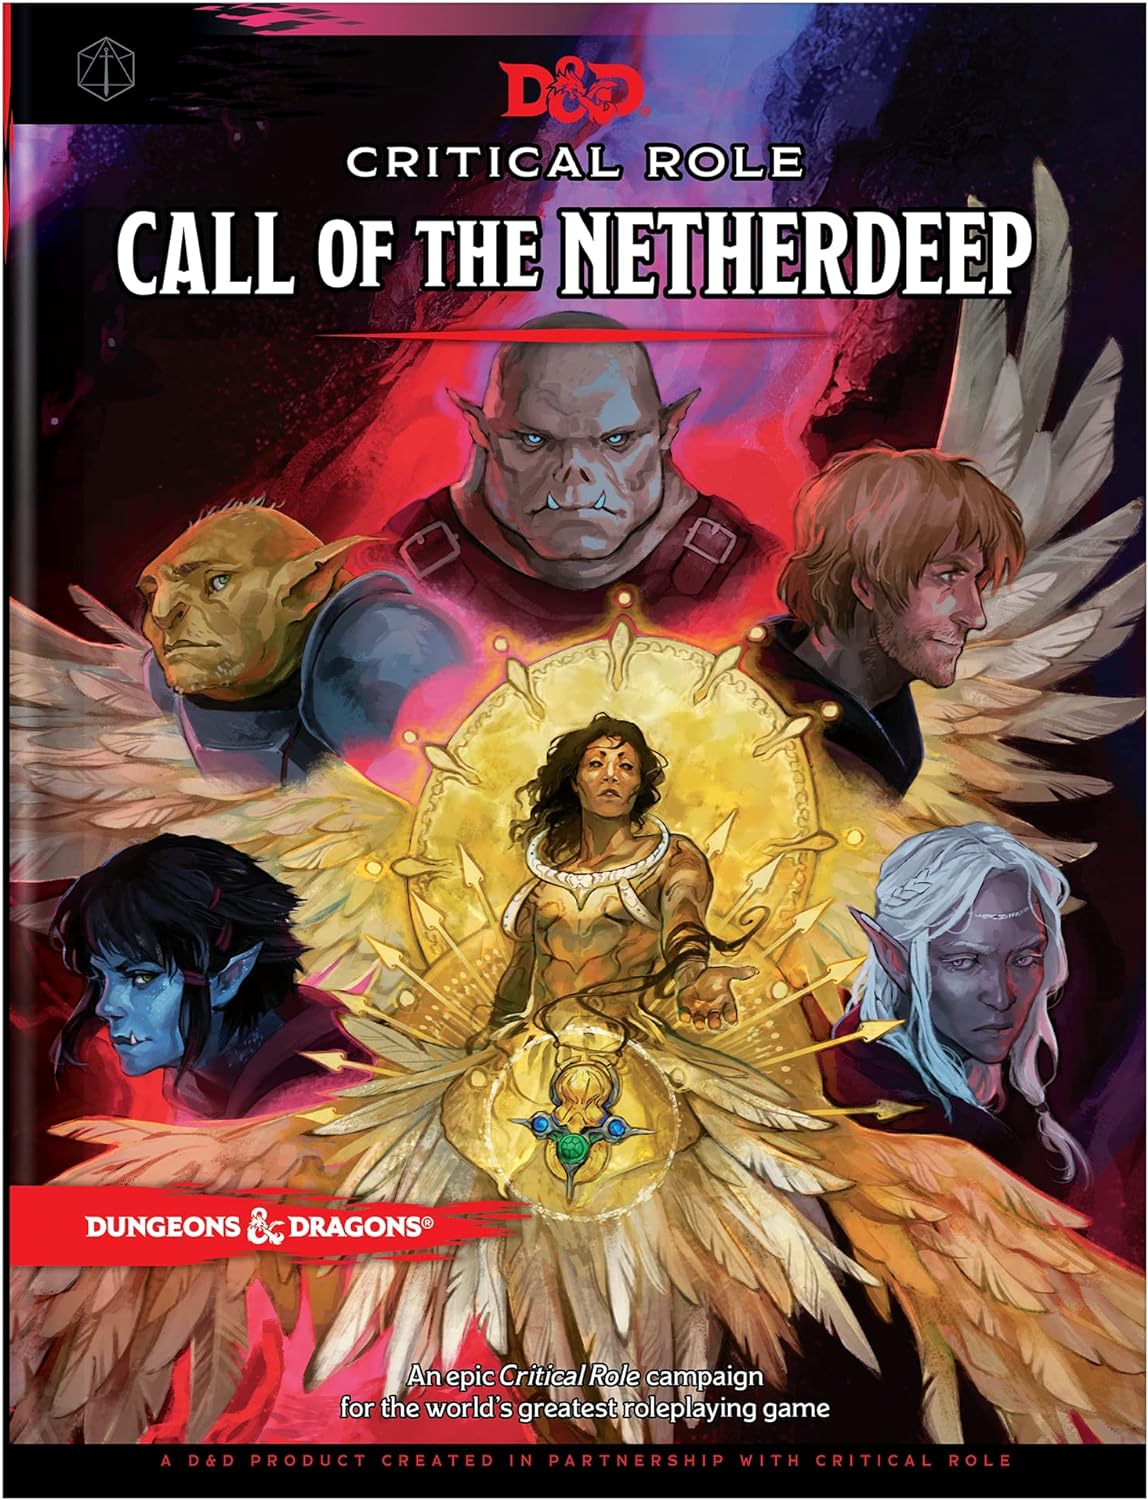 Dungeons & Dragons 5e: Critical Role Presents: Call of the Netherdeep